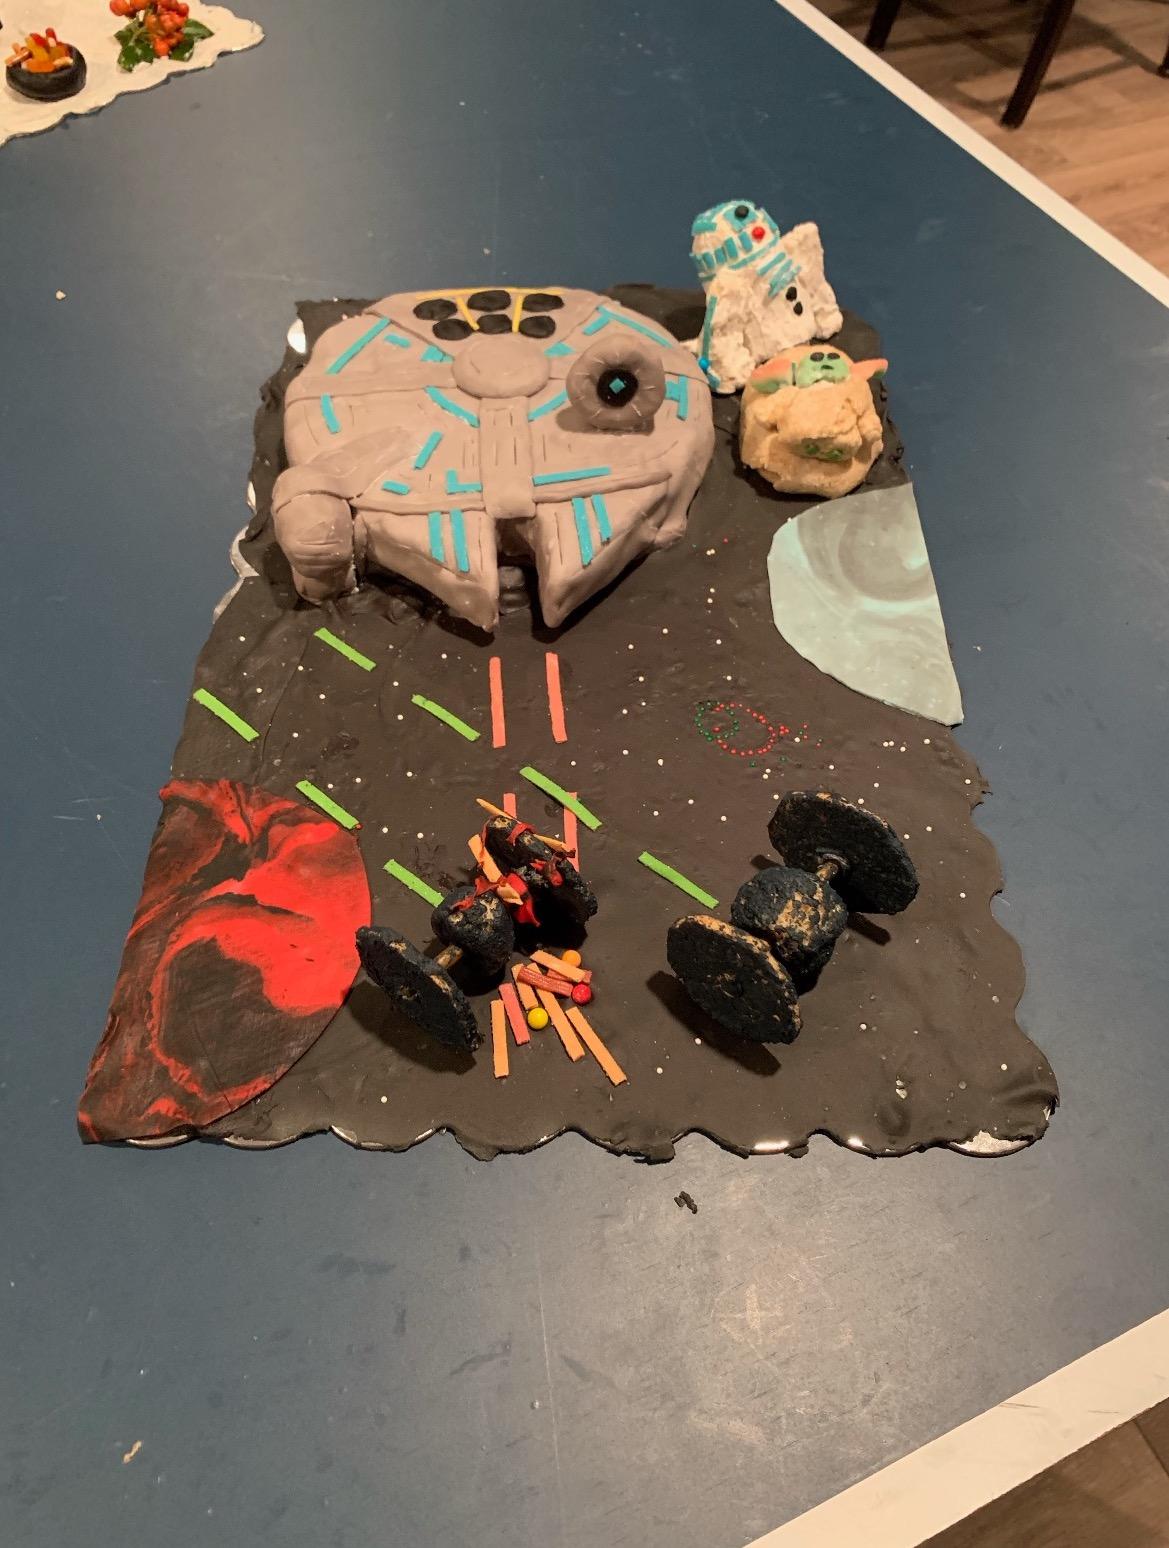 A Star Wars-themed Gingerbread house was created in 2019. (Courtesy of Jack Tortora)